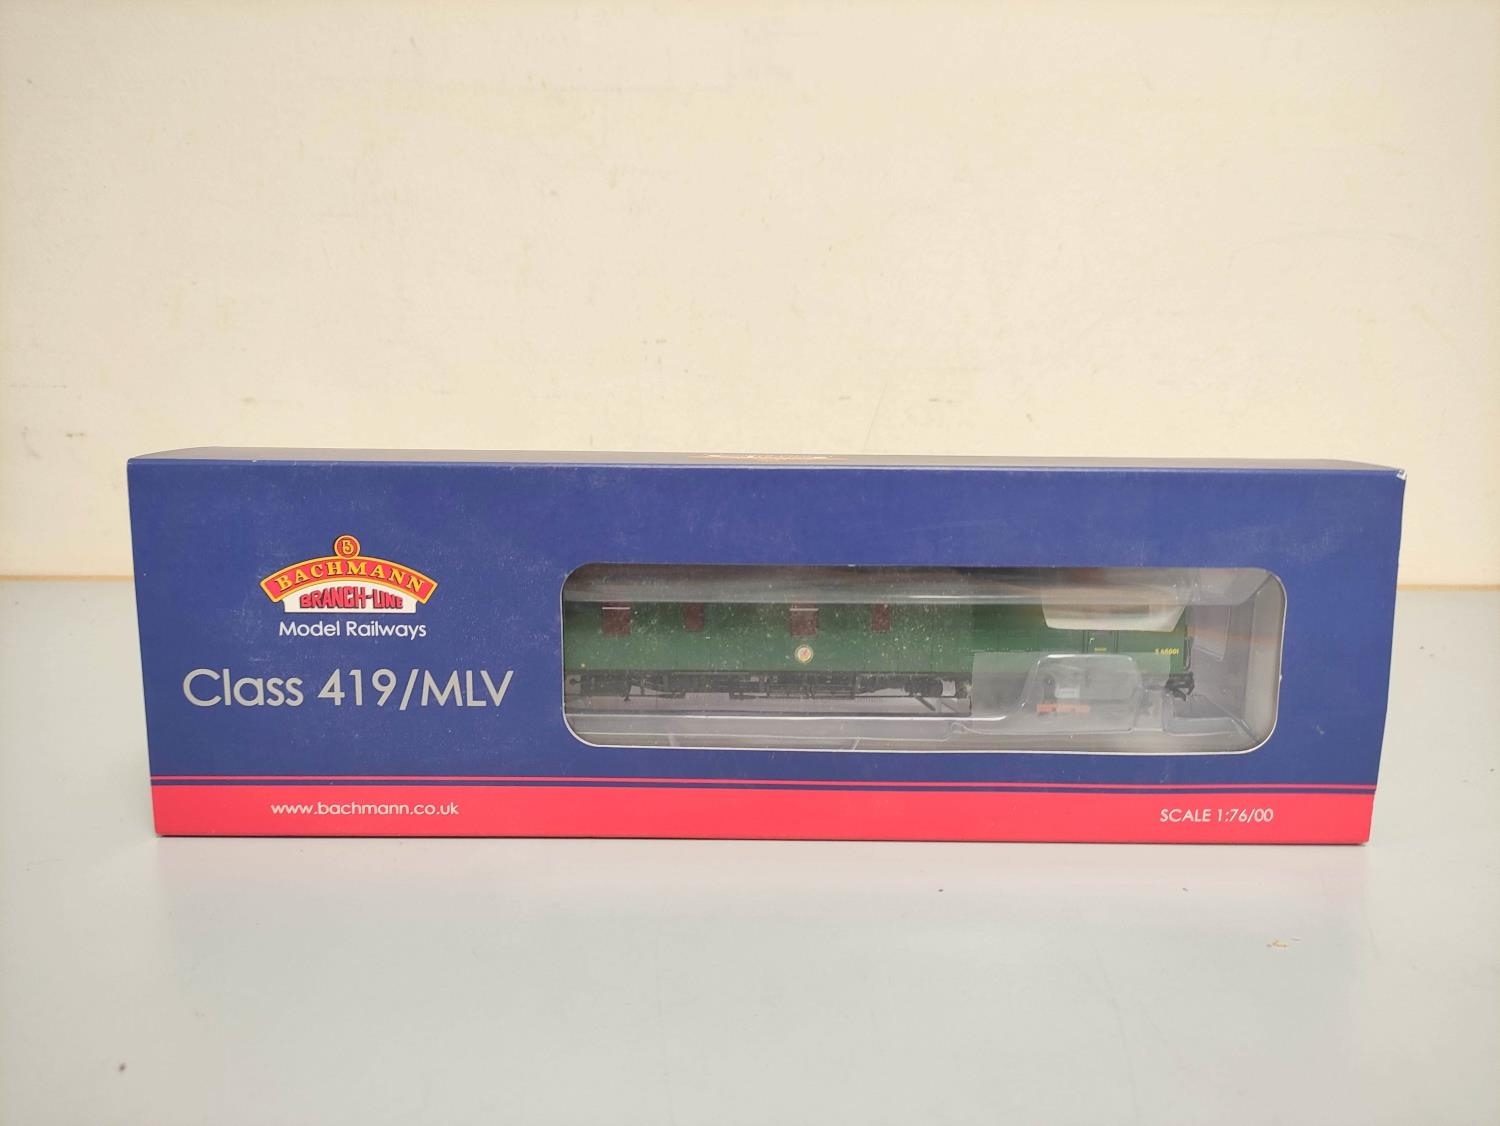 Bachmann Branchline. Boxed 00 gauge railway models to include a Class 419 Motor Luggage Van in - Image 9 of 10